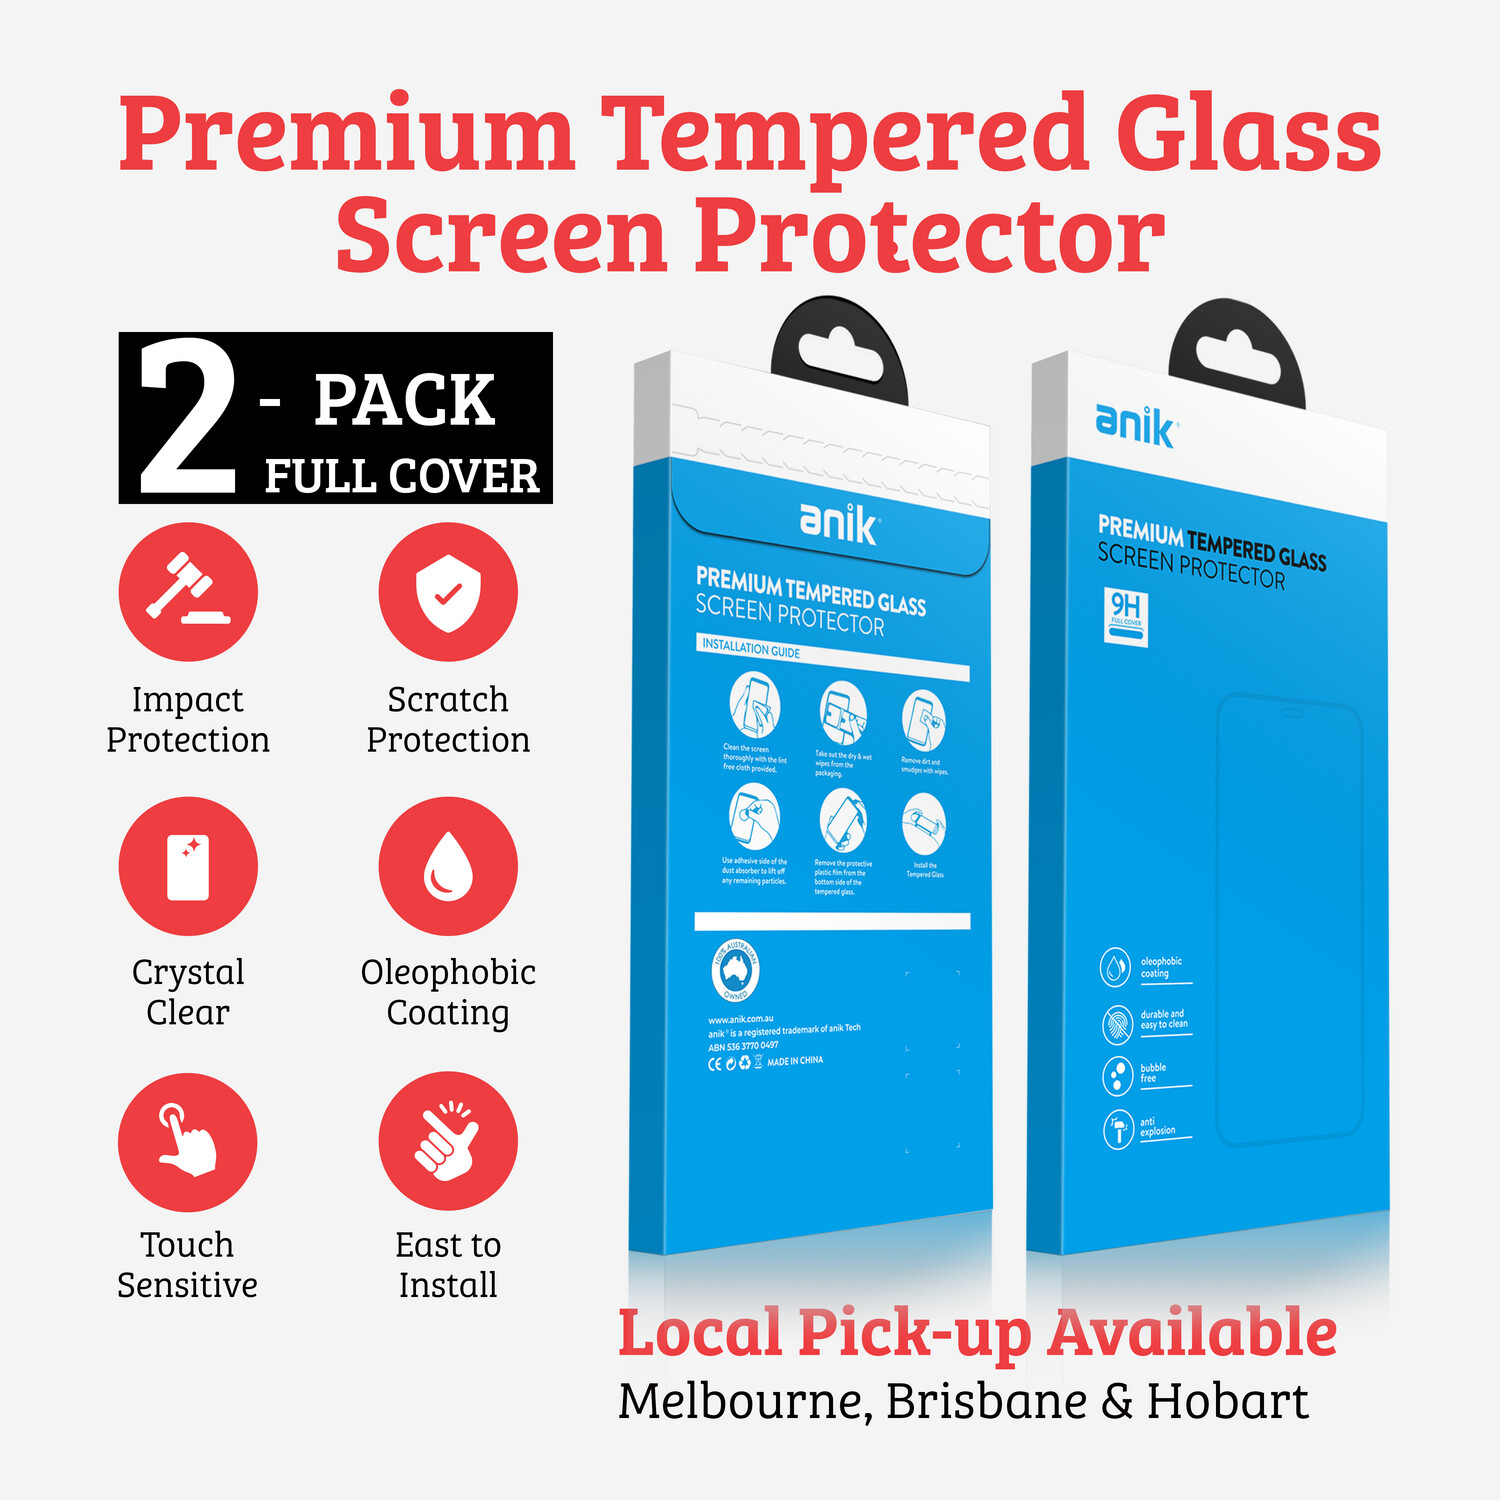 ANIK Premium Full Cover Tempered Glass Screen Protector for Xiaomi Redmi Note 5 Pro [2 Pack]